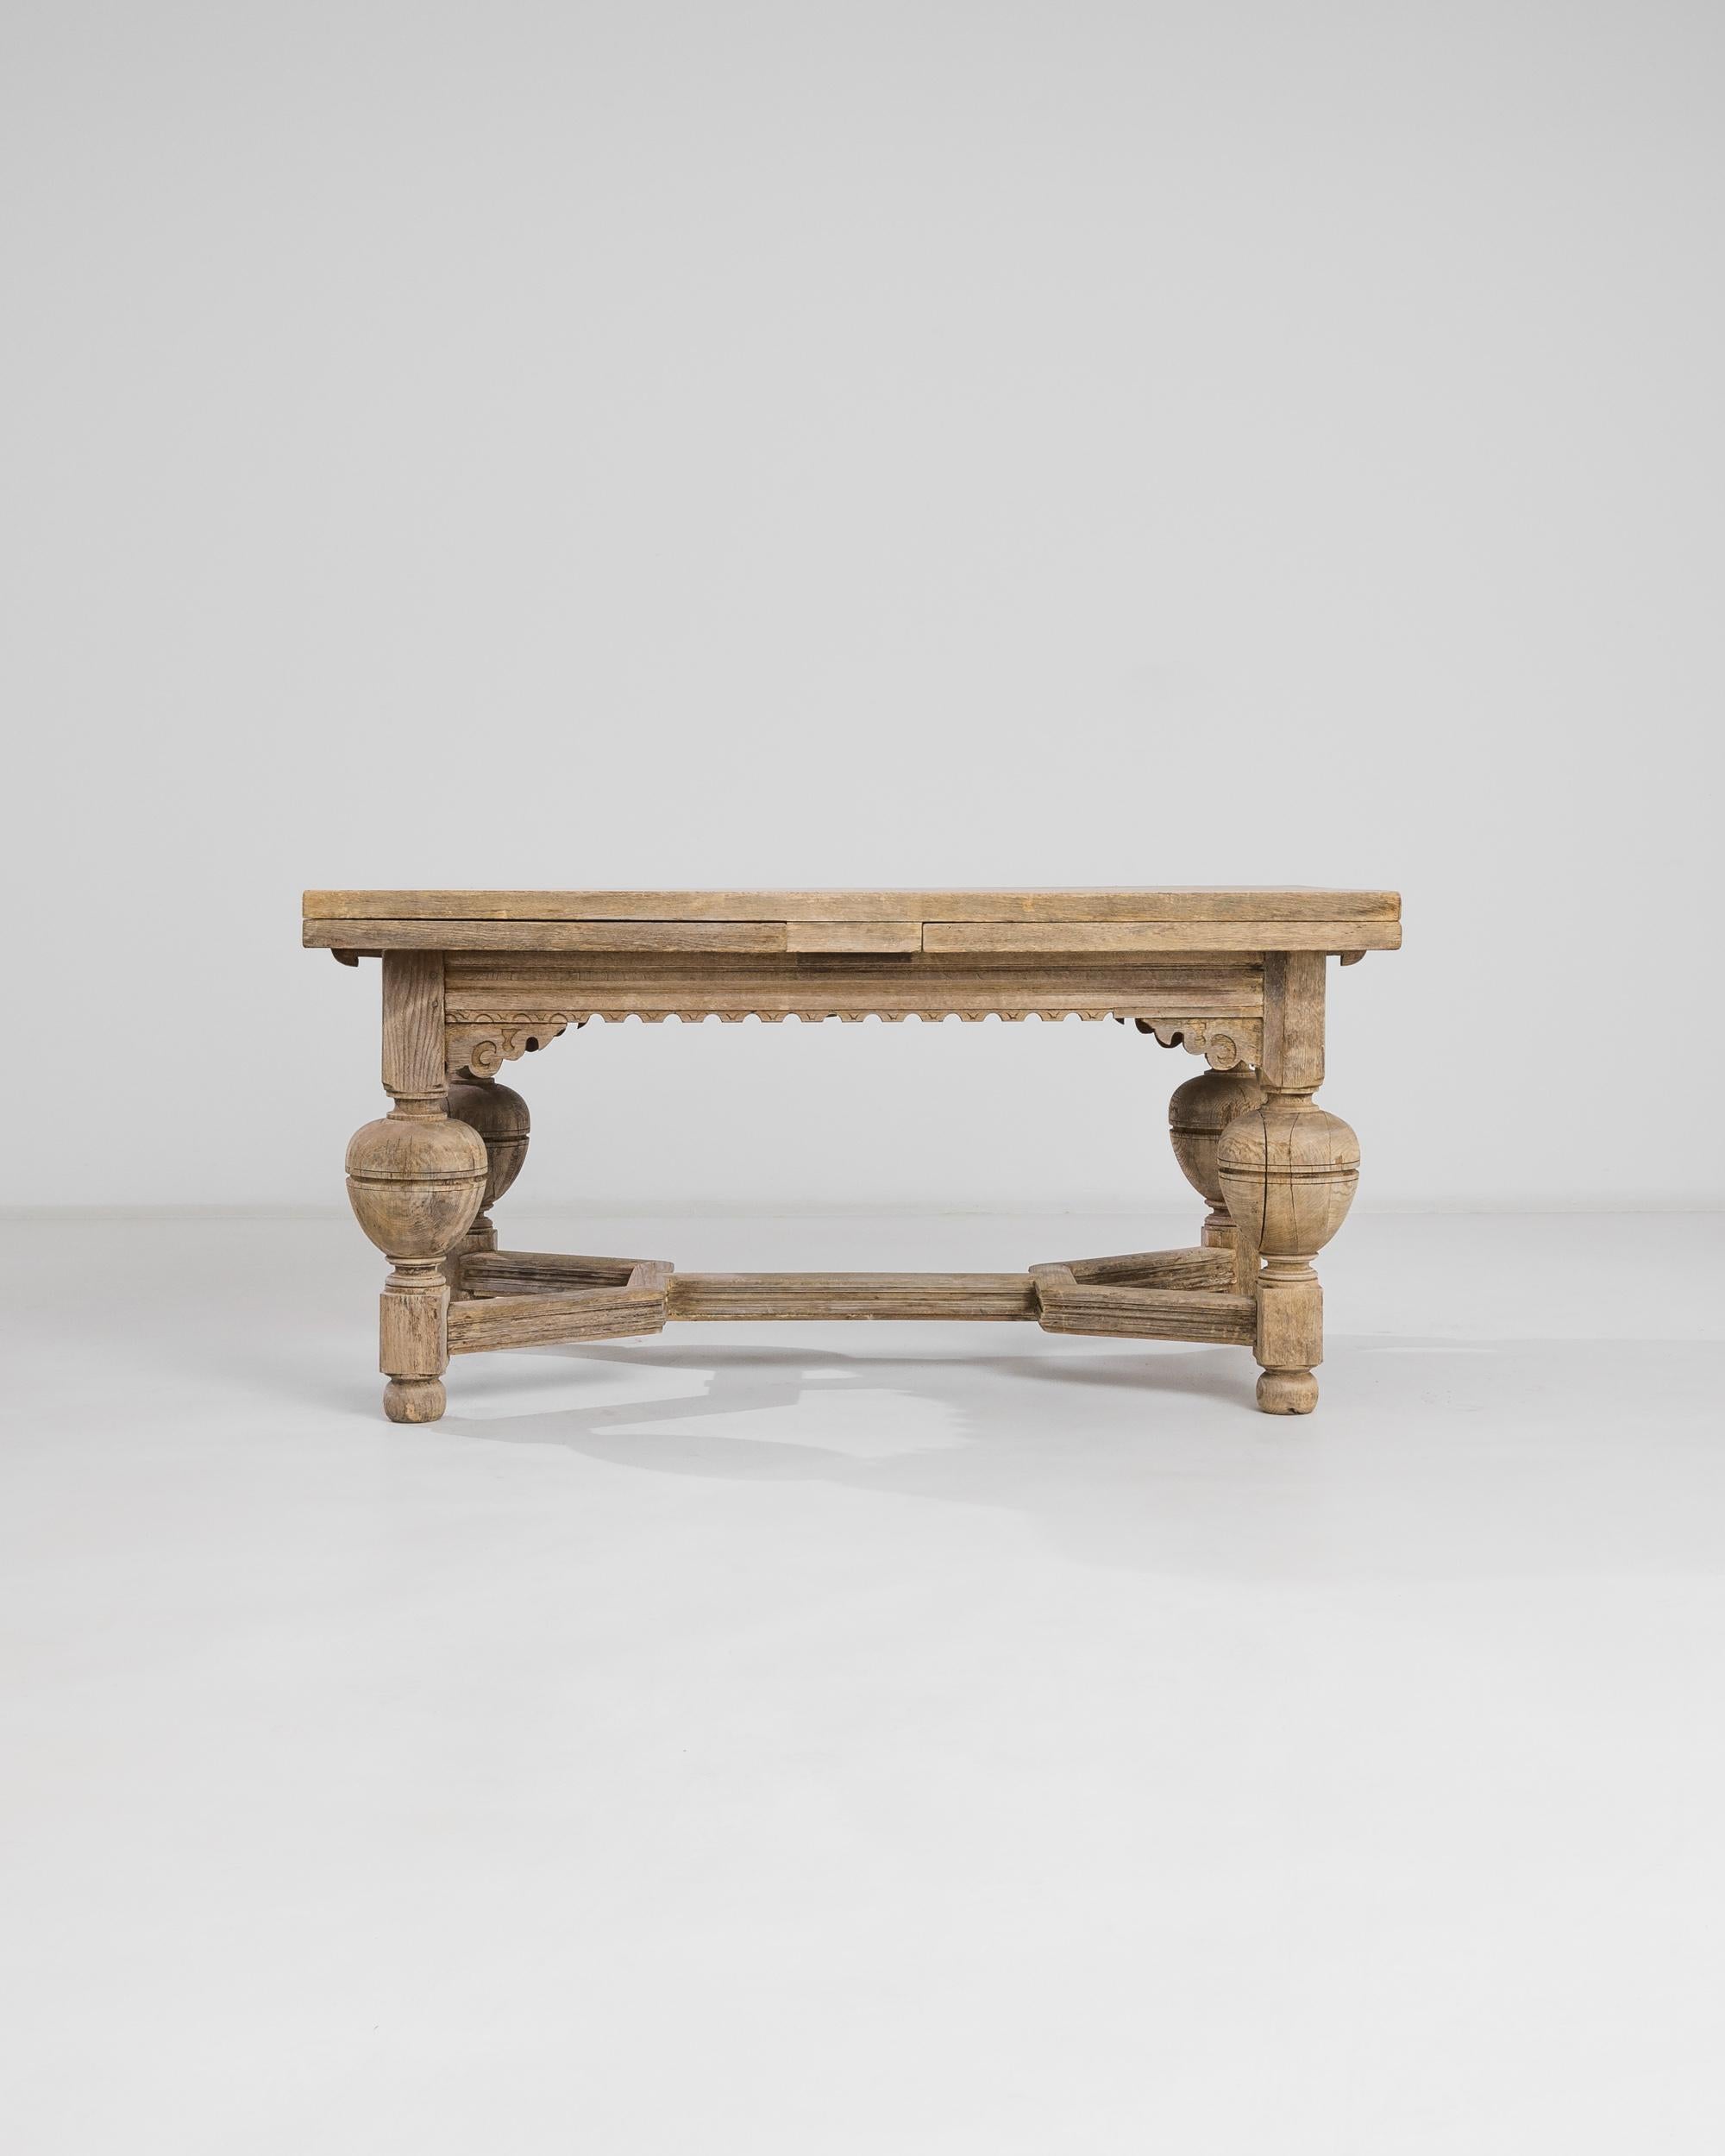 Staunch and sturdy, the statuesque proportions of this Neo Renaissance table are illuminated by the sunlit tone of the restored oak. Made in Belgium at the turn of the century, urn-shaped legs and a geometric stretcher create a stately silhouette,